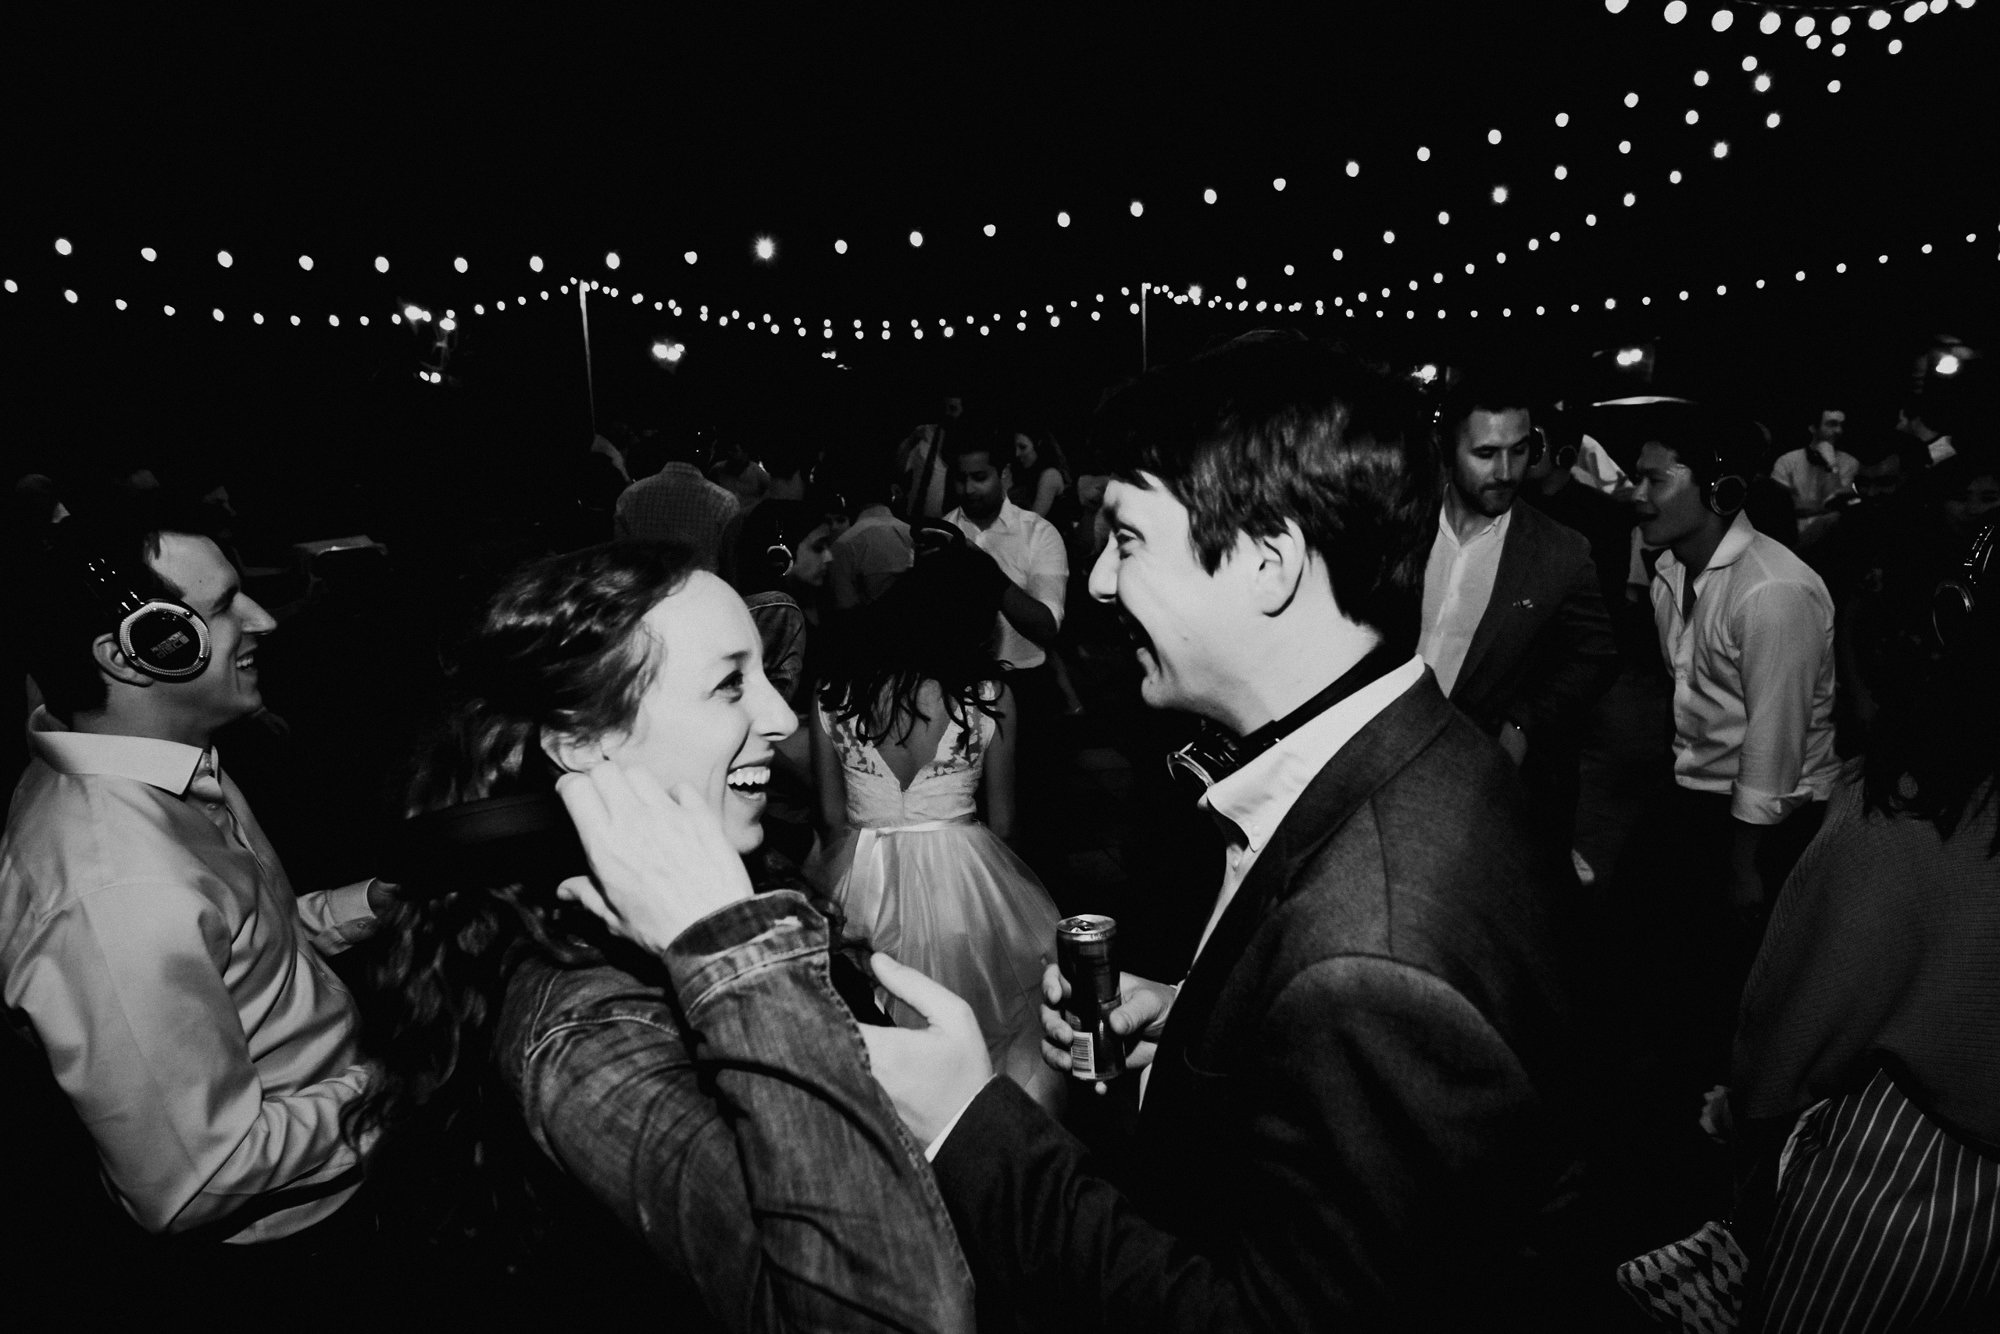 Saguaro Lake Guest Ranch The Perfect Location for a Laid-Back Fun-Filled Wedding. The best documentary wedding photographer Mantas Kubilinskas-92.jpg